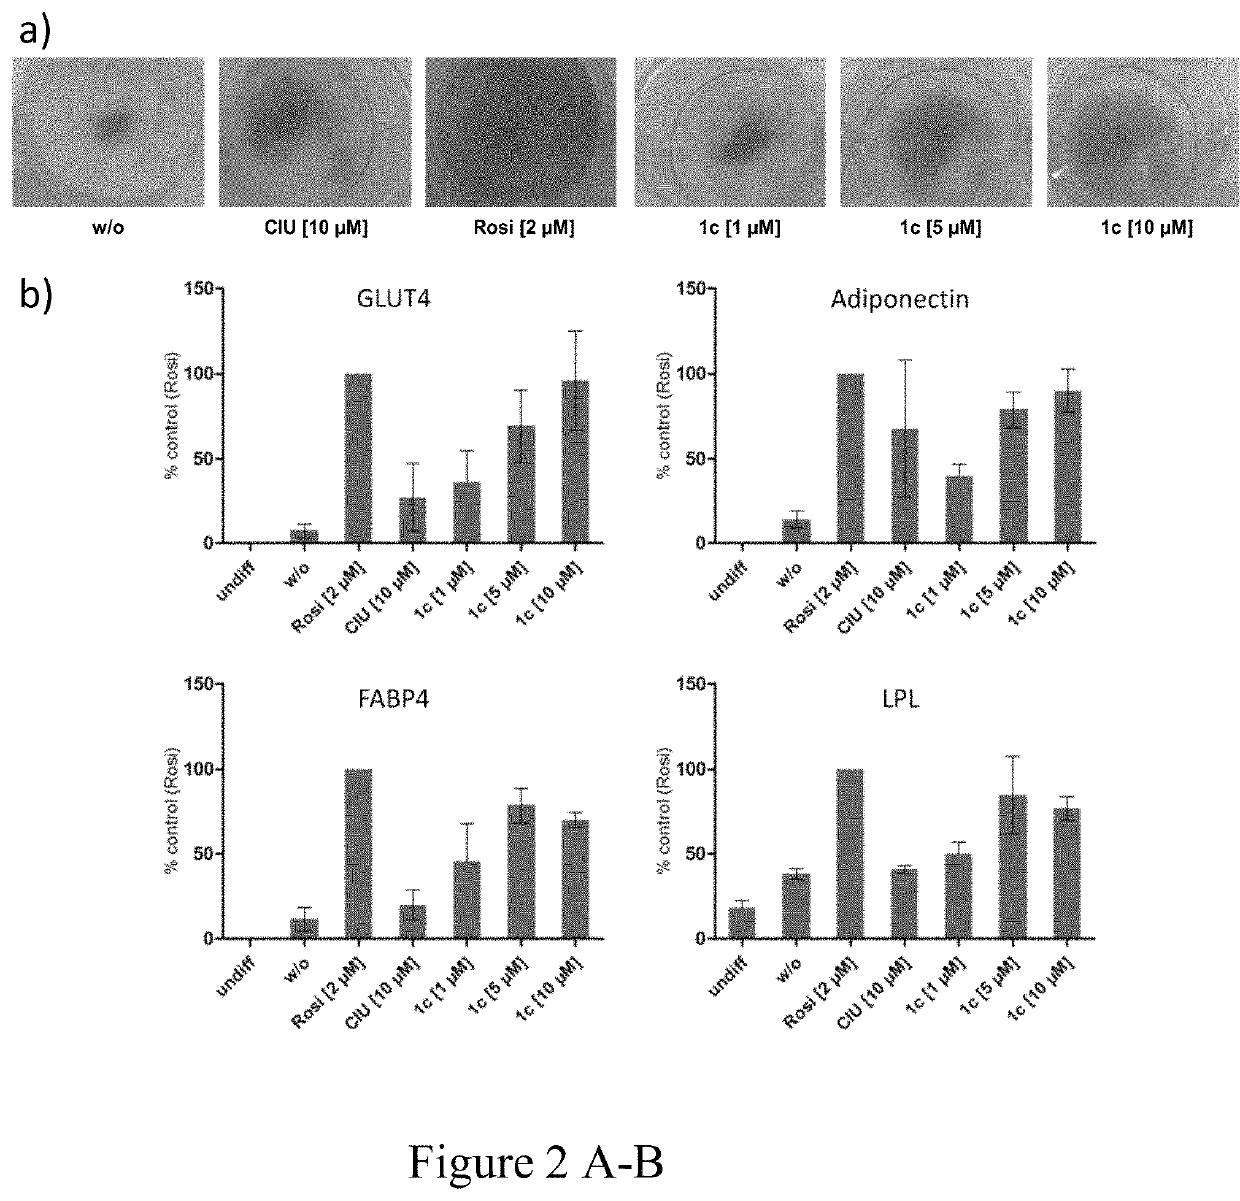 Diabetes and metabolic syndrome treatment with a novel dual modulator of soluble epoxide hydrolase and peroxisome proliferator-activated receptors